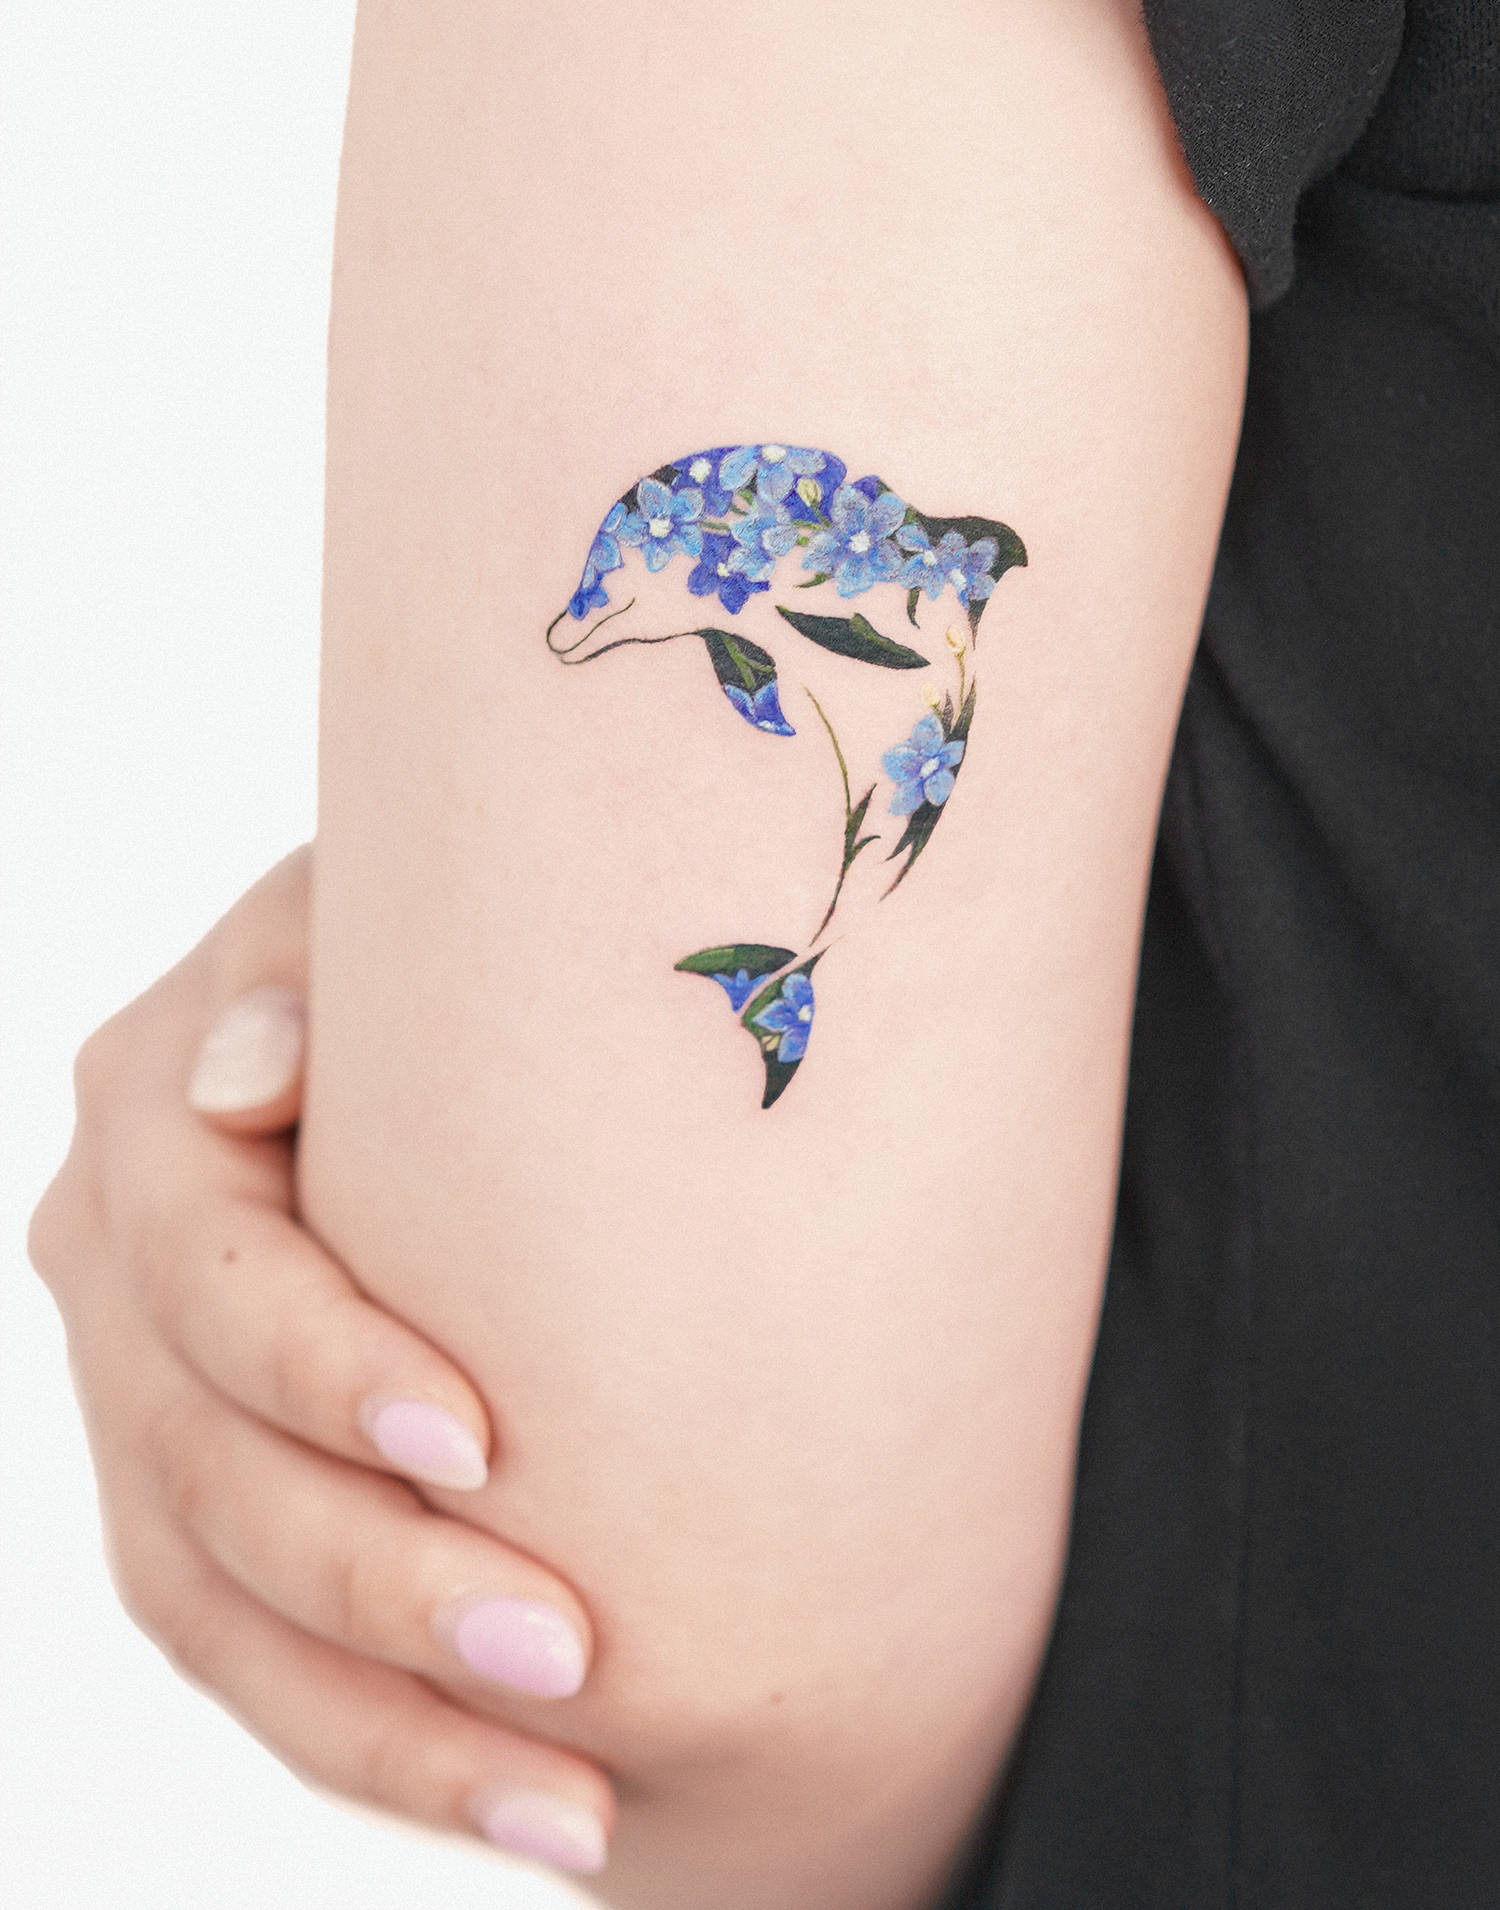 Tattoo-ideas-with-dolphin-19 - Tattoo Designs for Women